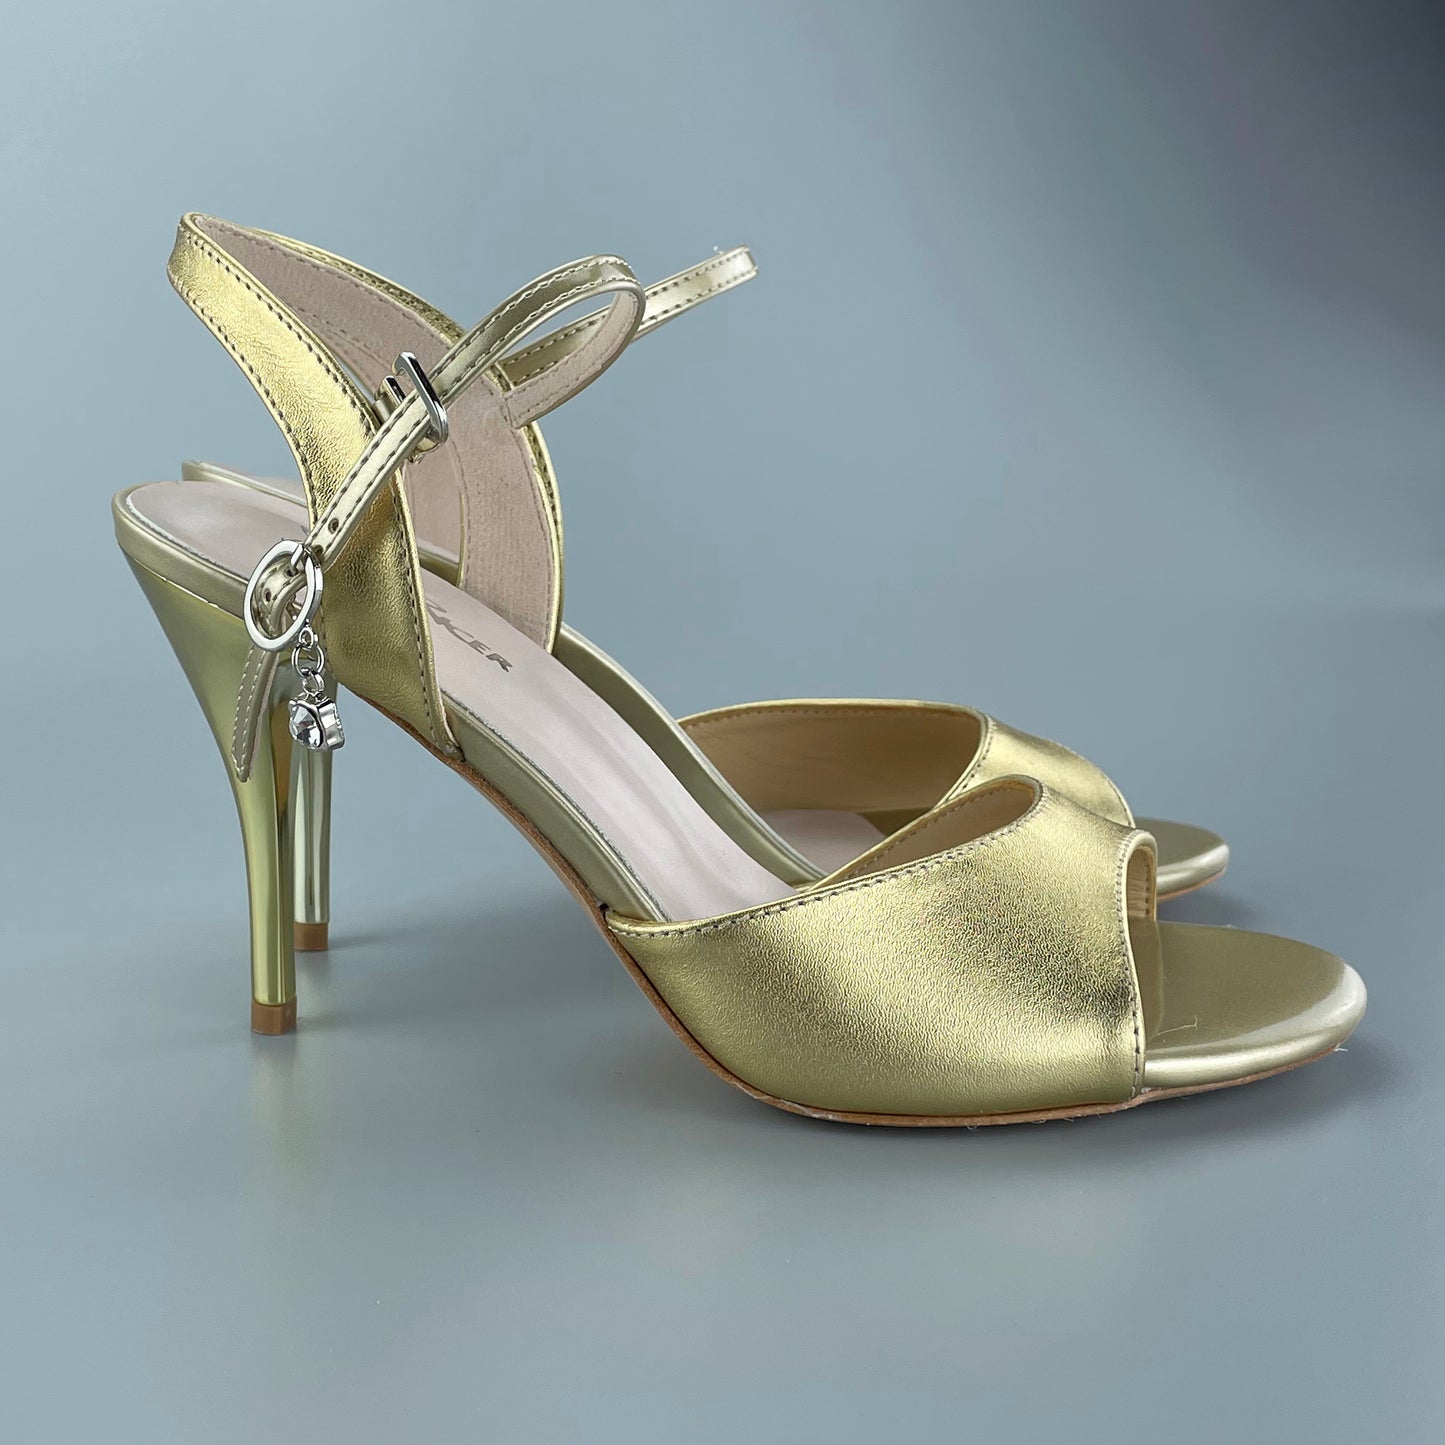 Pro Dancer Open-toe and Open-back Argentine Tango Shoes High Salsa Heels Hard Leather Sole Sandals Gold (PD-9044A)